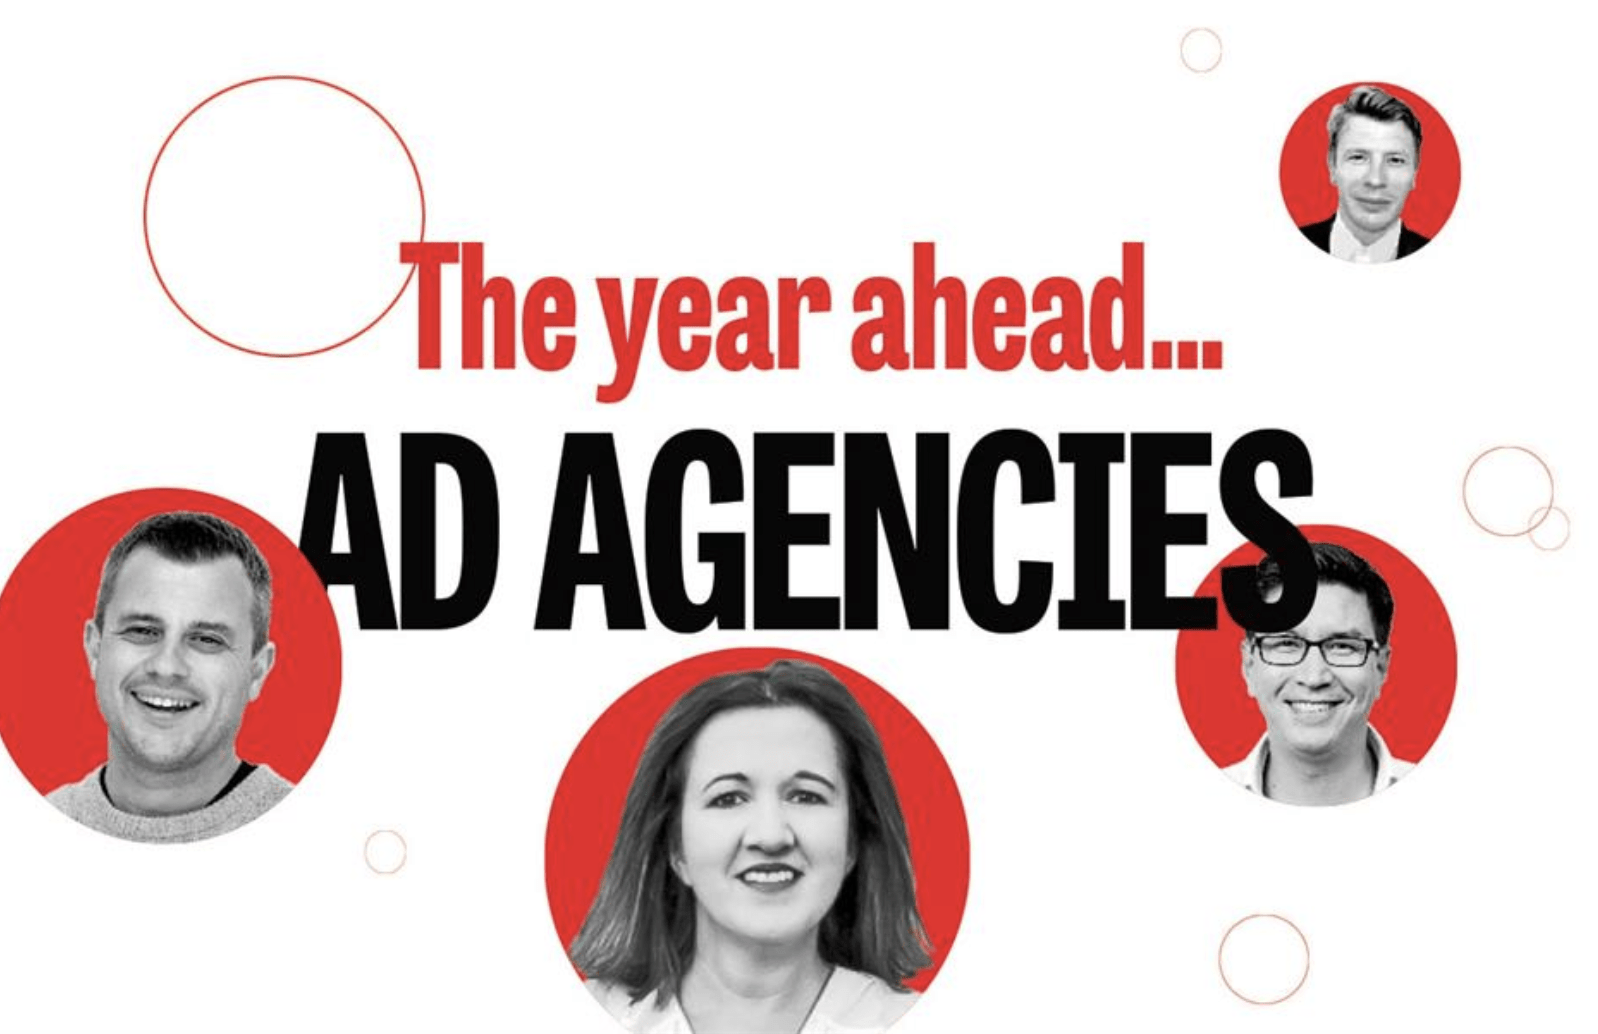 Poster with text in the center that reads "The year ahead... Ad Agencies". Surrounding the text in red bubbles are black and white photos of the following advertising executives: Chris Kay, Larissa Vince, Bill Scott, and Alex Best.